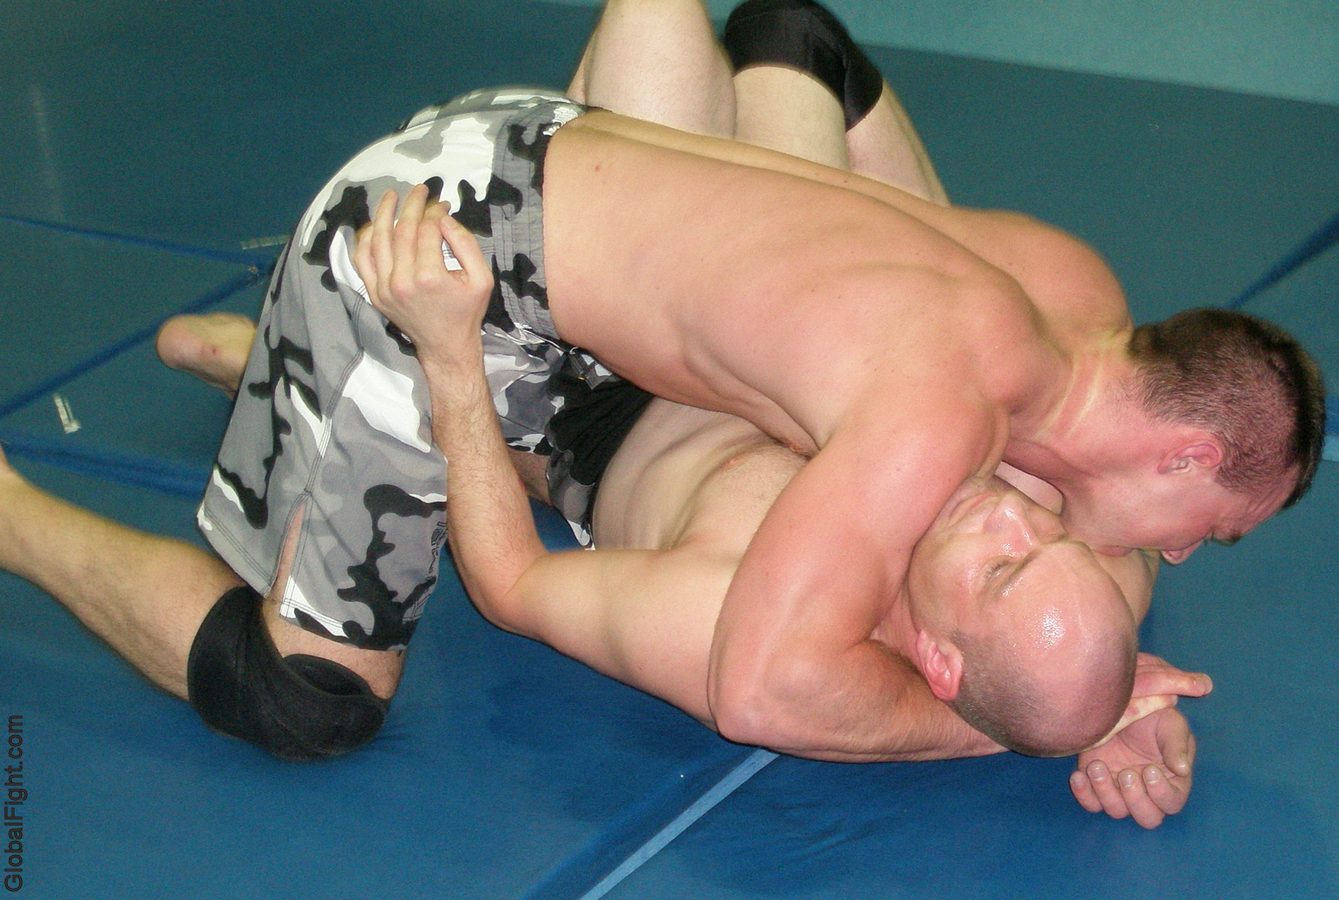 MMA grapplers fighting ufc style matches tapouts